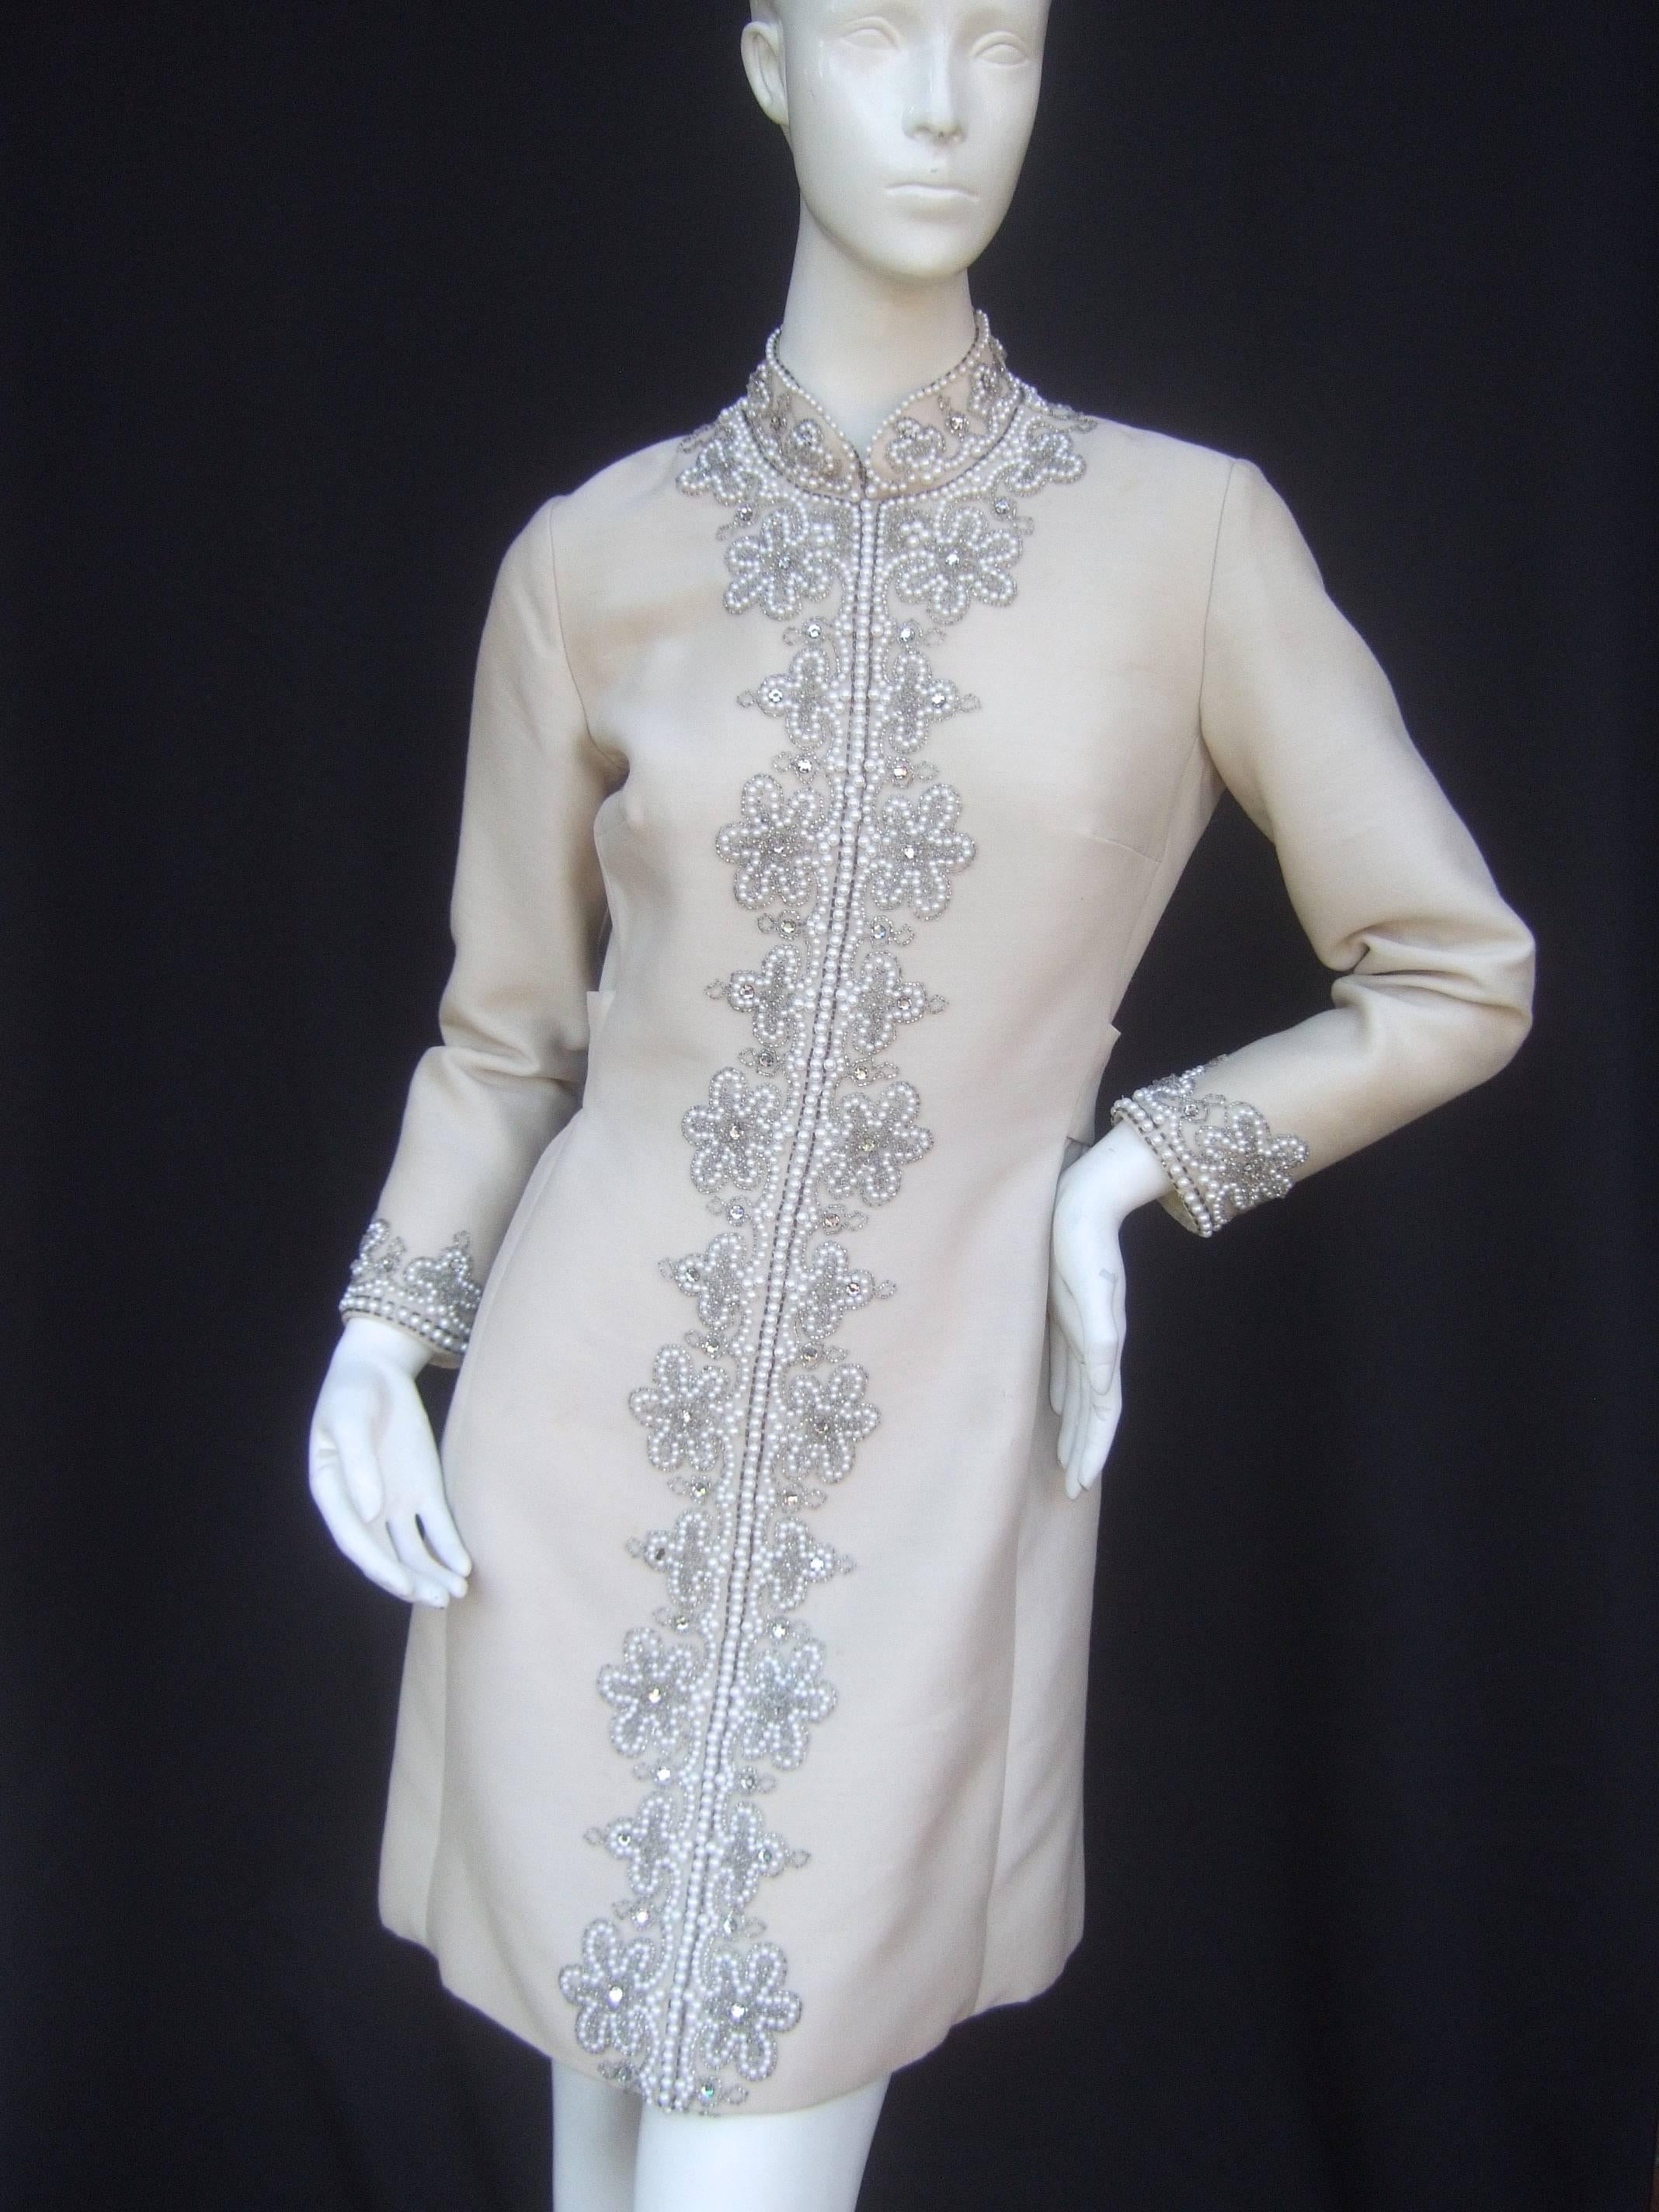 Neiman Marcus Champagne beaded tunic dress ca 1970
The elegant vintage douponi dress is embellished with 
elaborate glass beads, crystals, and enamel pearl beads

The exquisite beading frames the necklace, runs down 
the center and circles the